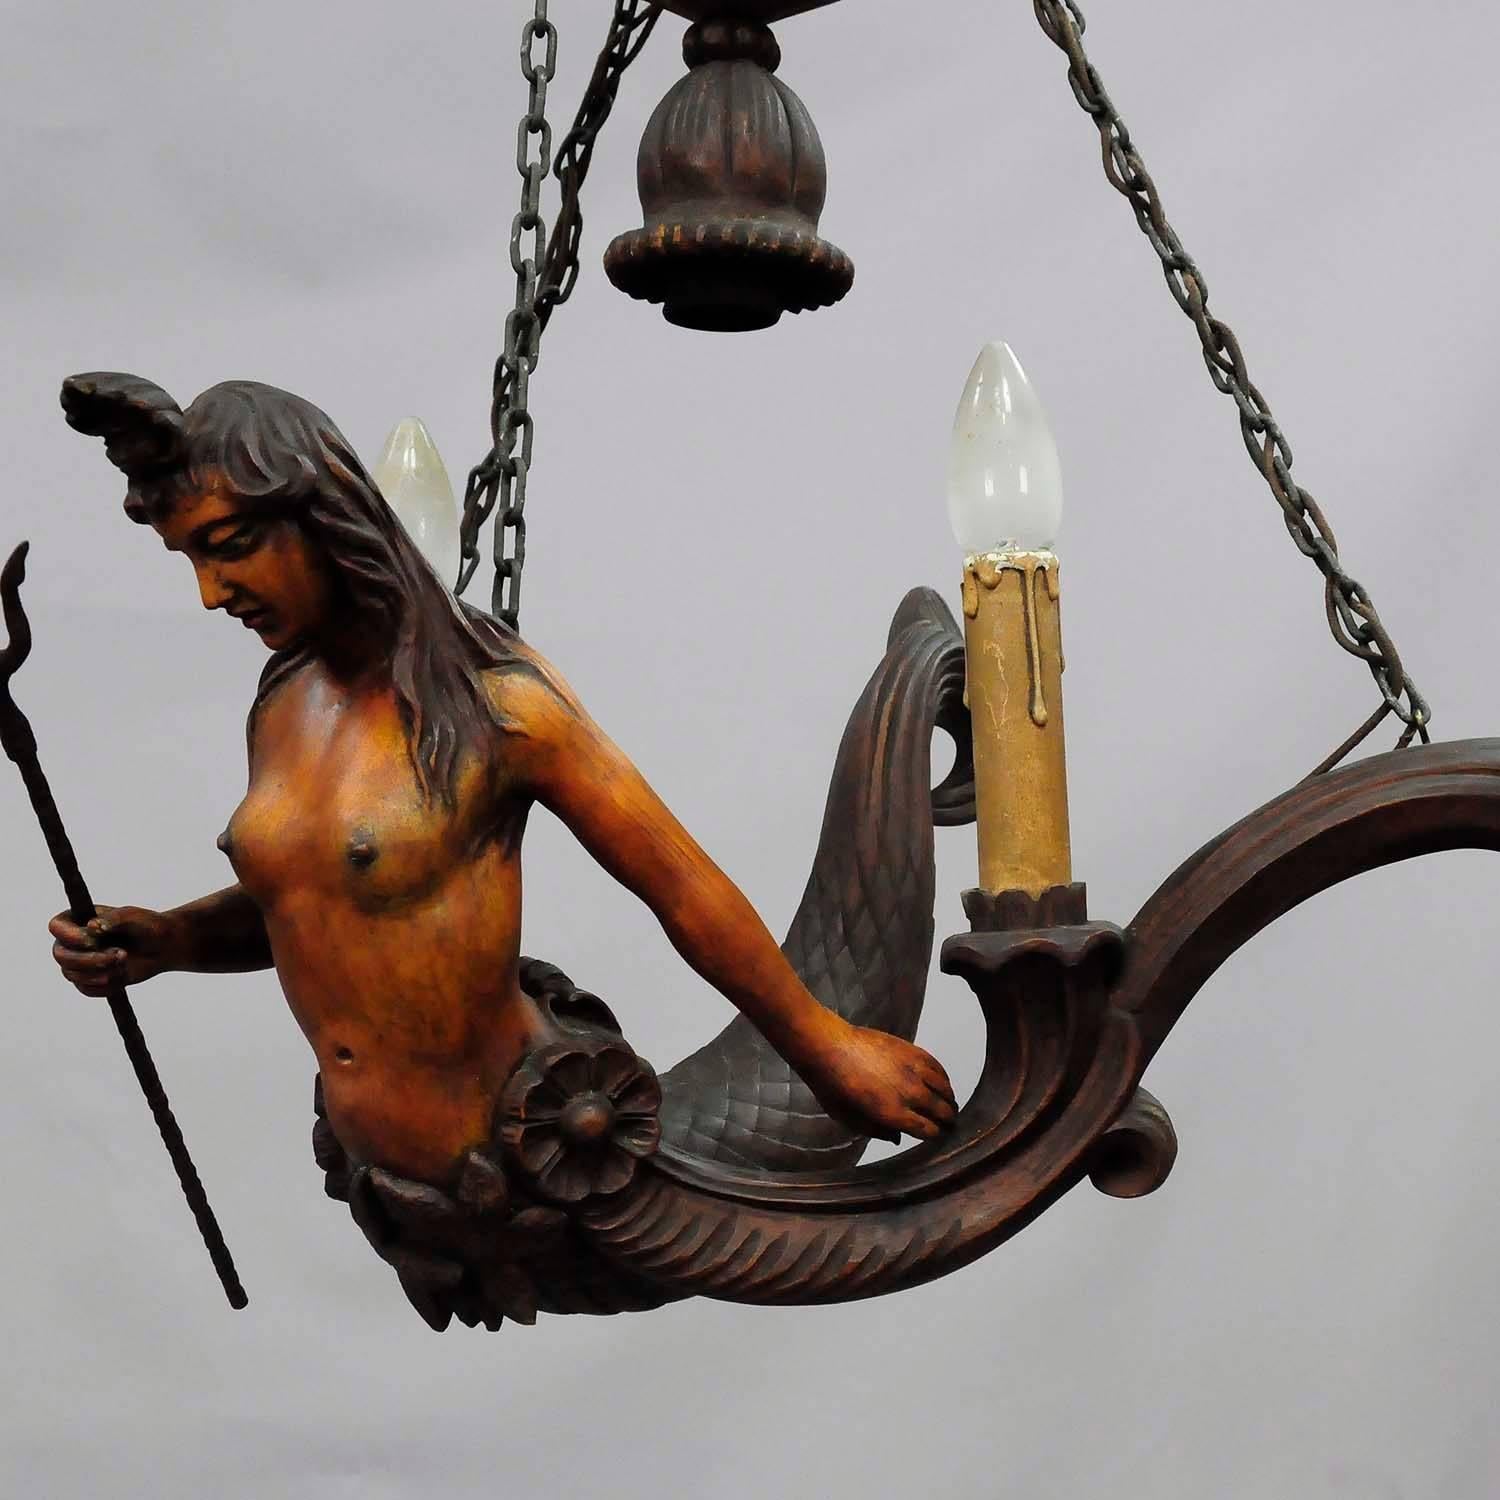 This extra-ordinary lusterweibchen is made completely from wood without any antlers. A hand-carved and hand-painted statue of a beautiful mermaid with a trident in the right hand. Executed circa 1910. The chandelier is equipped with two